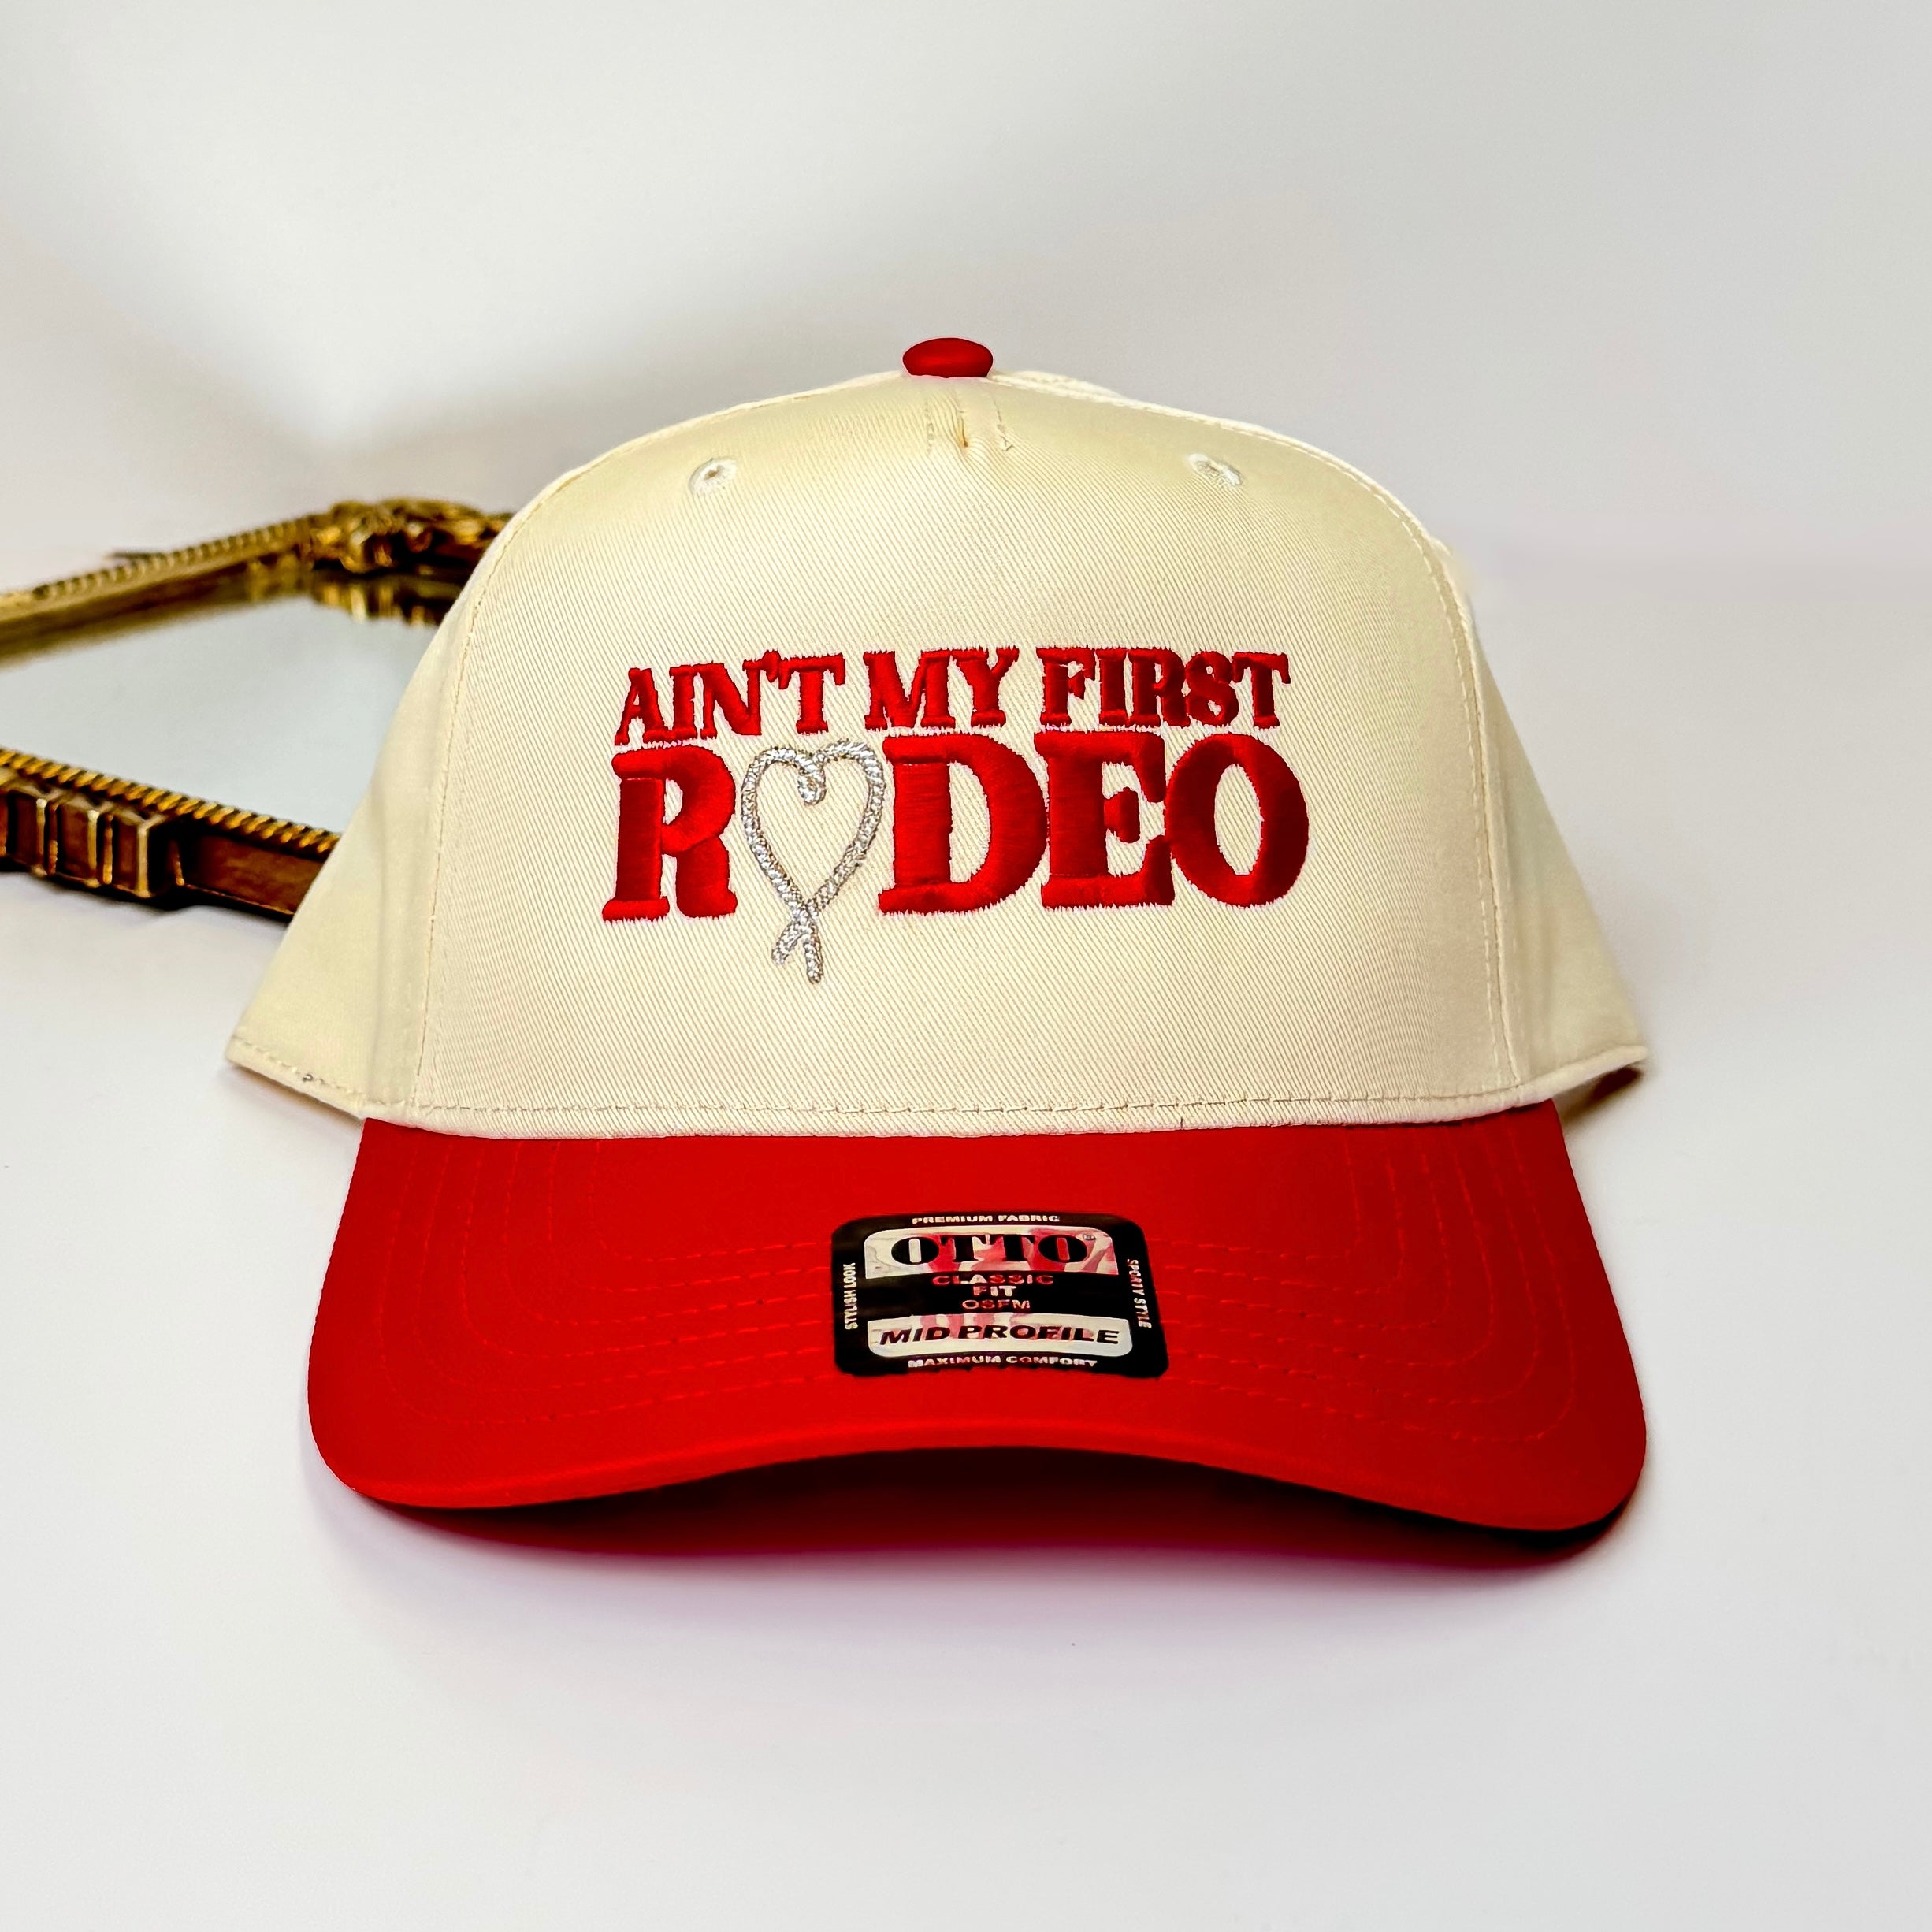 Ain’t My First Rodeo Vintage Hat in Red and Cream - Giddy Up Glamour Boutique